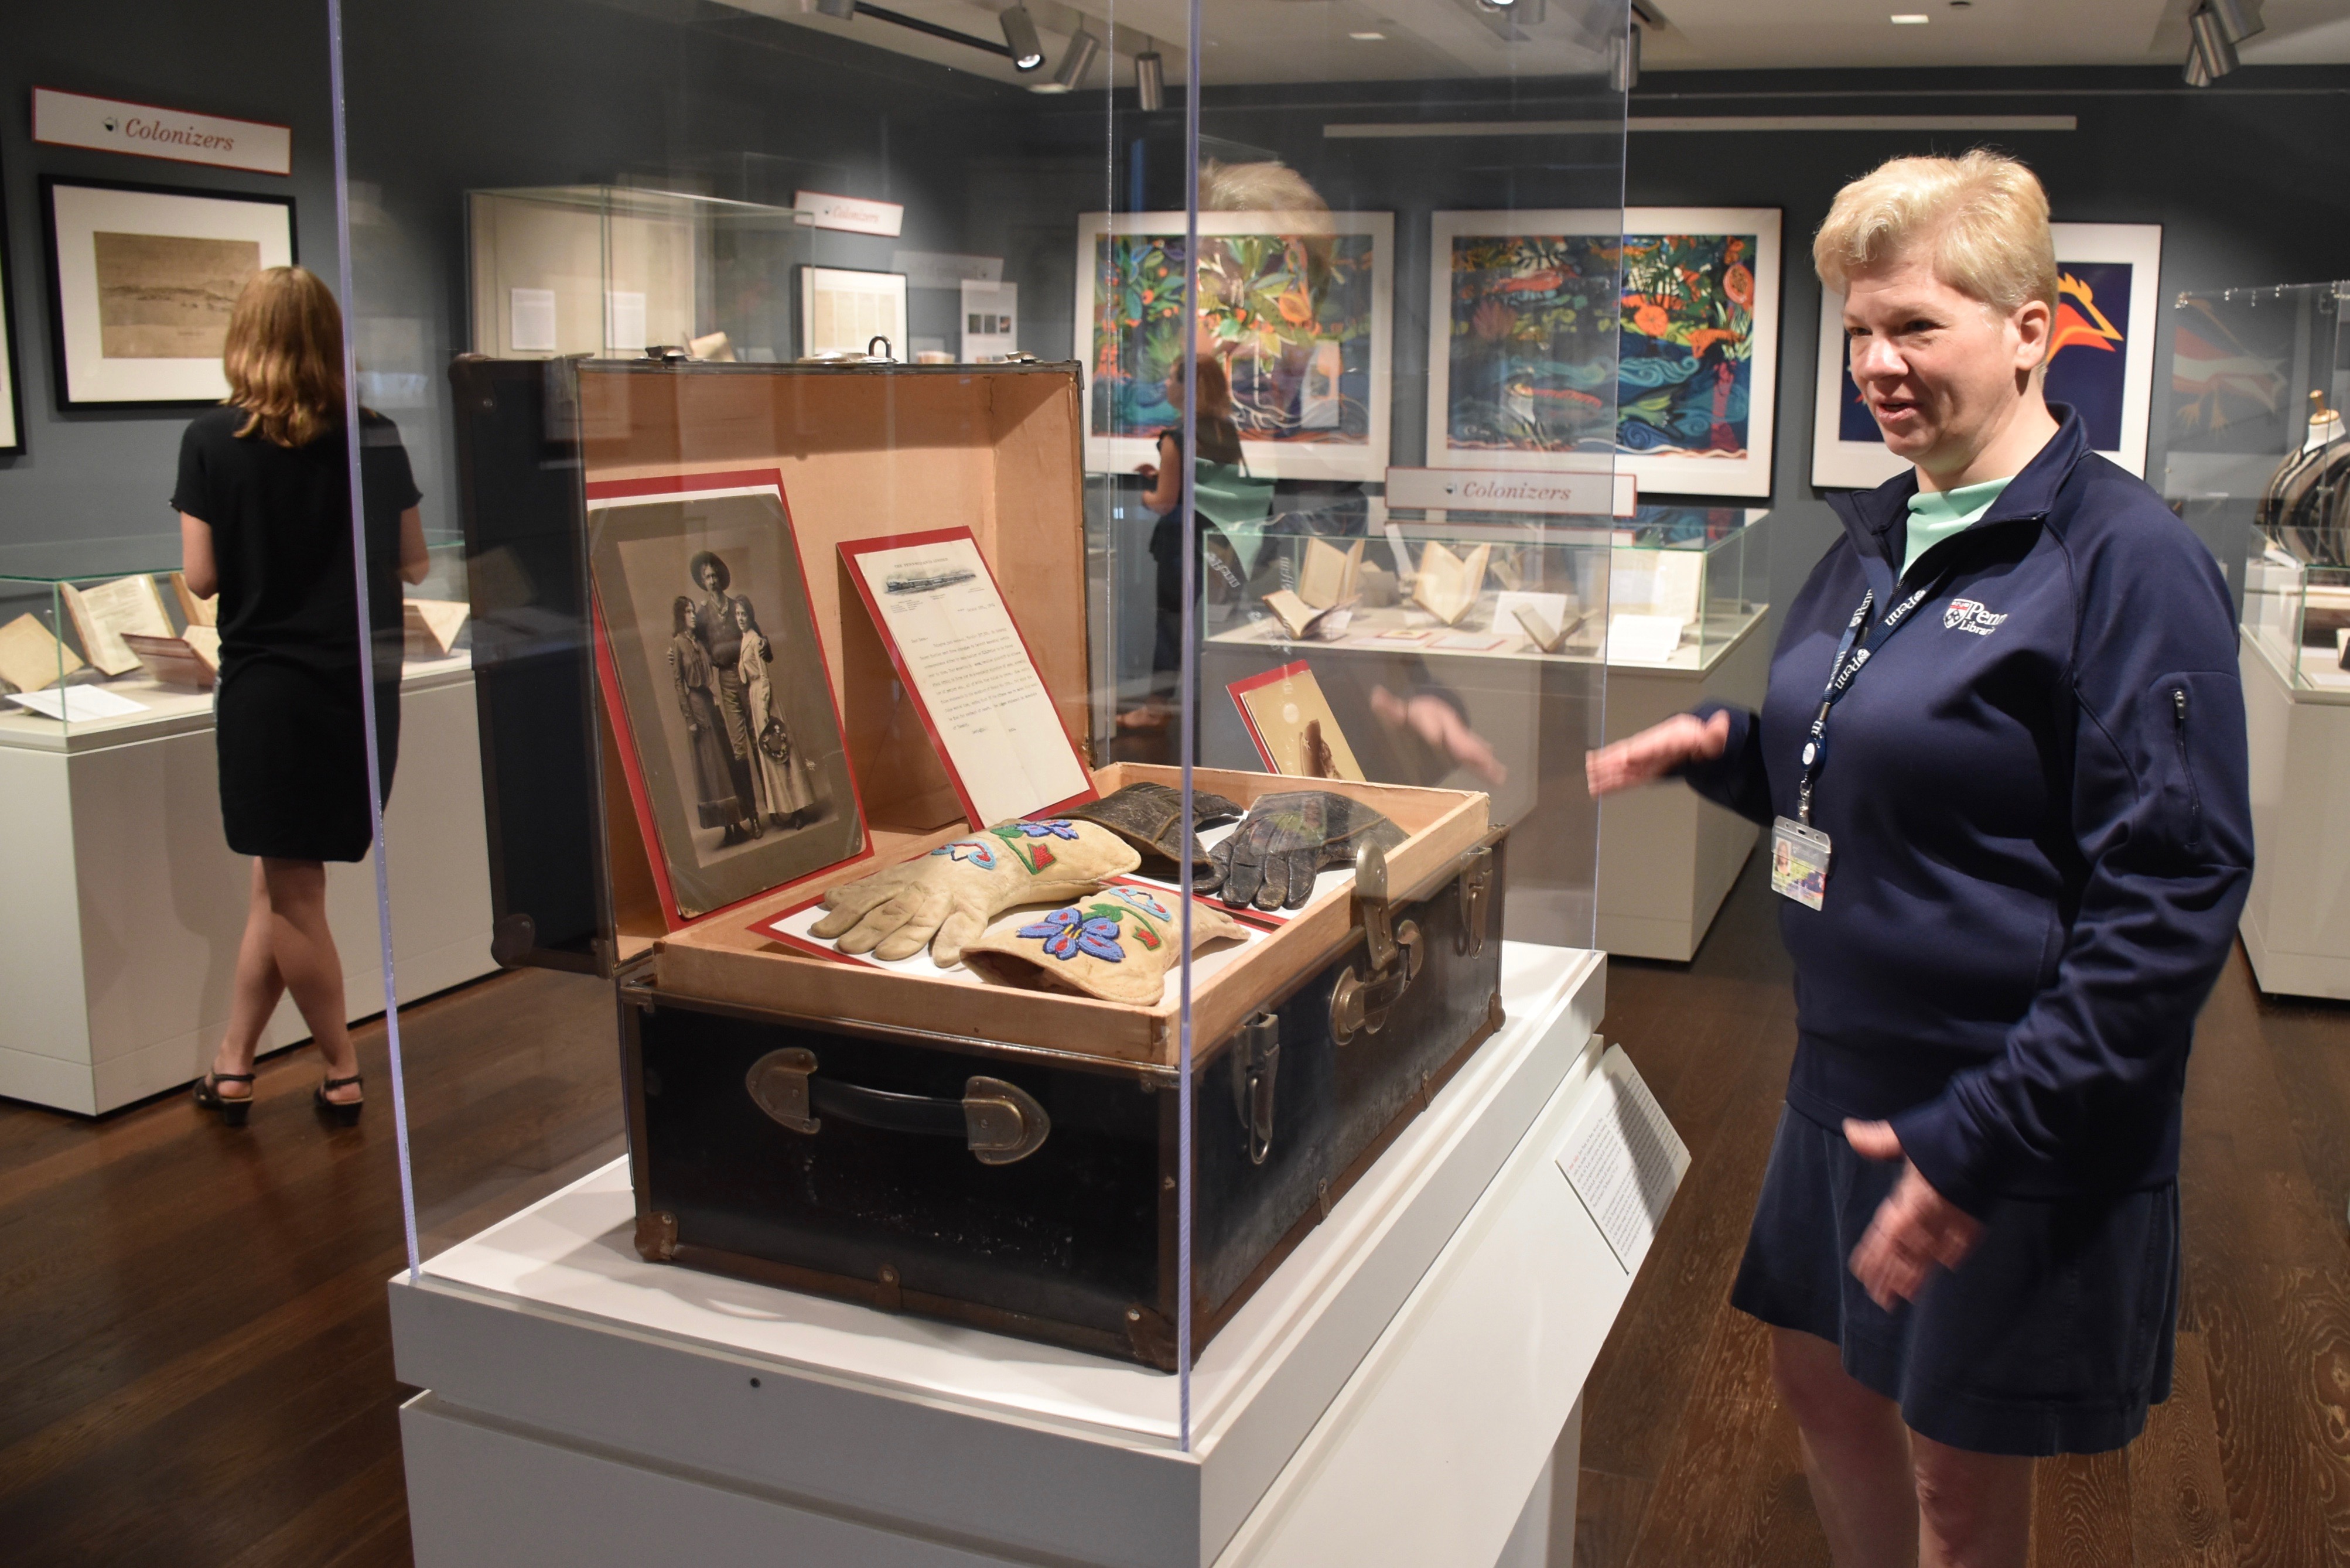 Penn-Libraries-Regan-Klastrup-with-Annie-Oakley-trunk-and-gloves-in-exhibition-on-women-in-the-American-wilderness